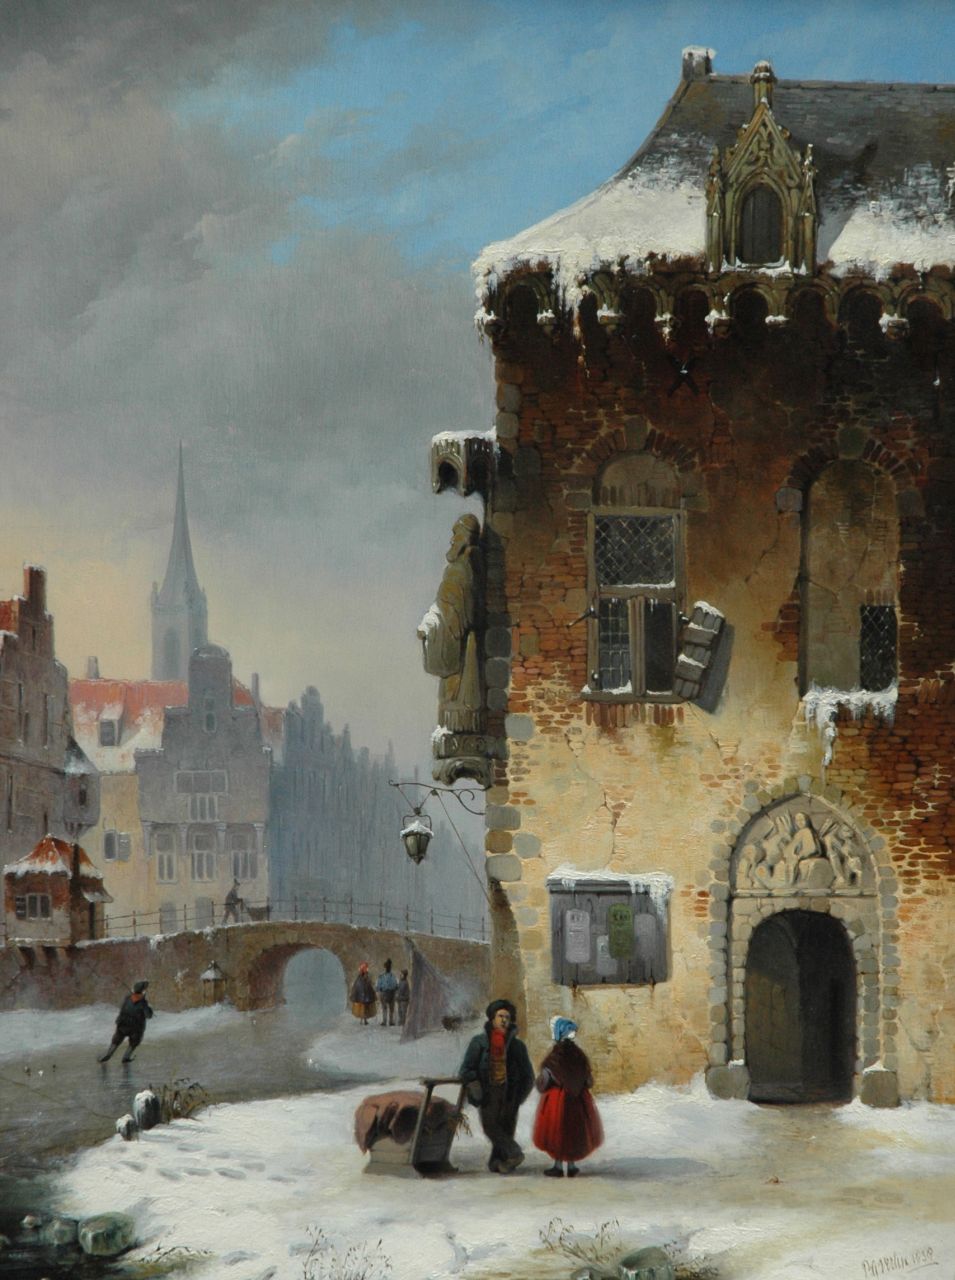 Vertin P.G.  | Petrus Gerardus Vertin, A town in winter with strollers and skaters, oil on panel 51.2 x 38.9 cm, signed l.r. and painted 1838